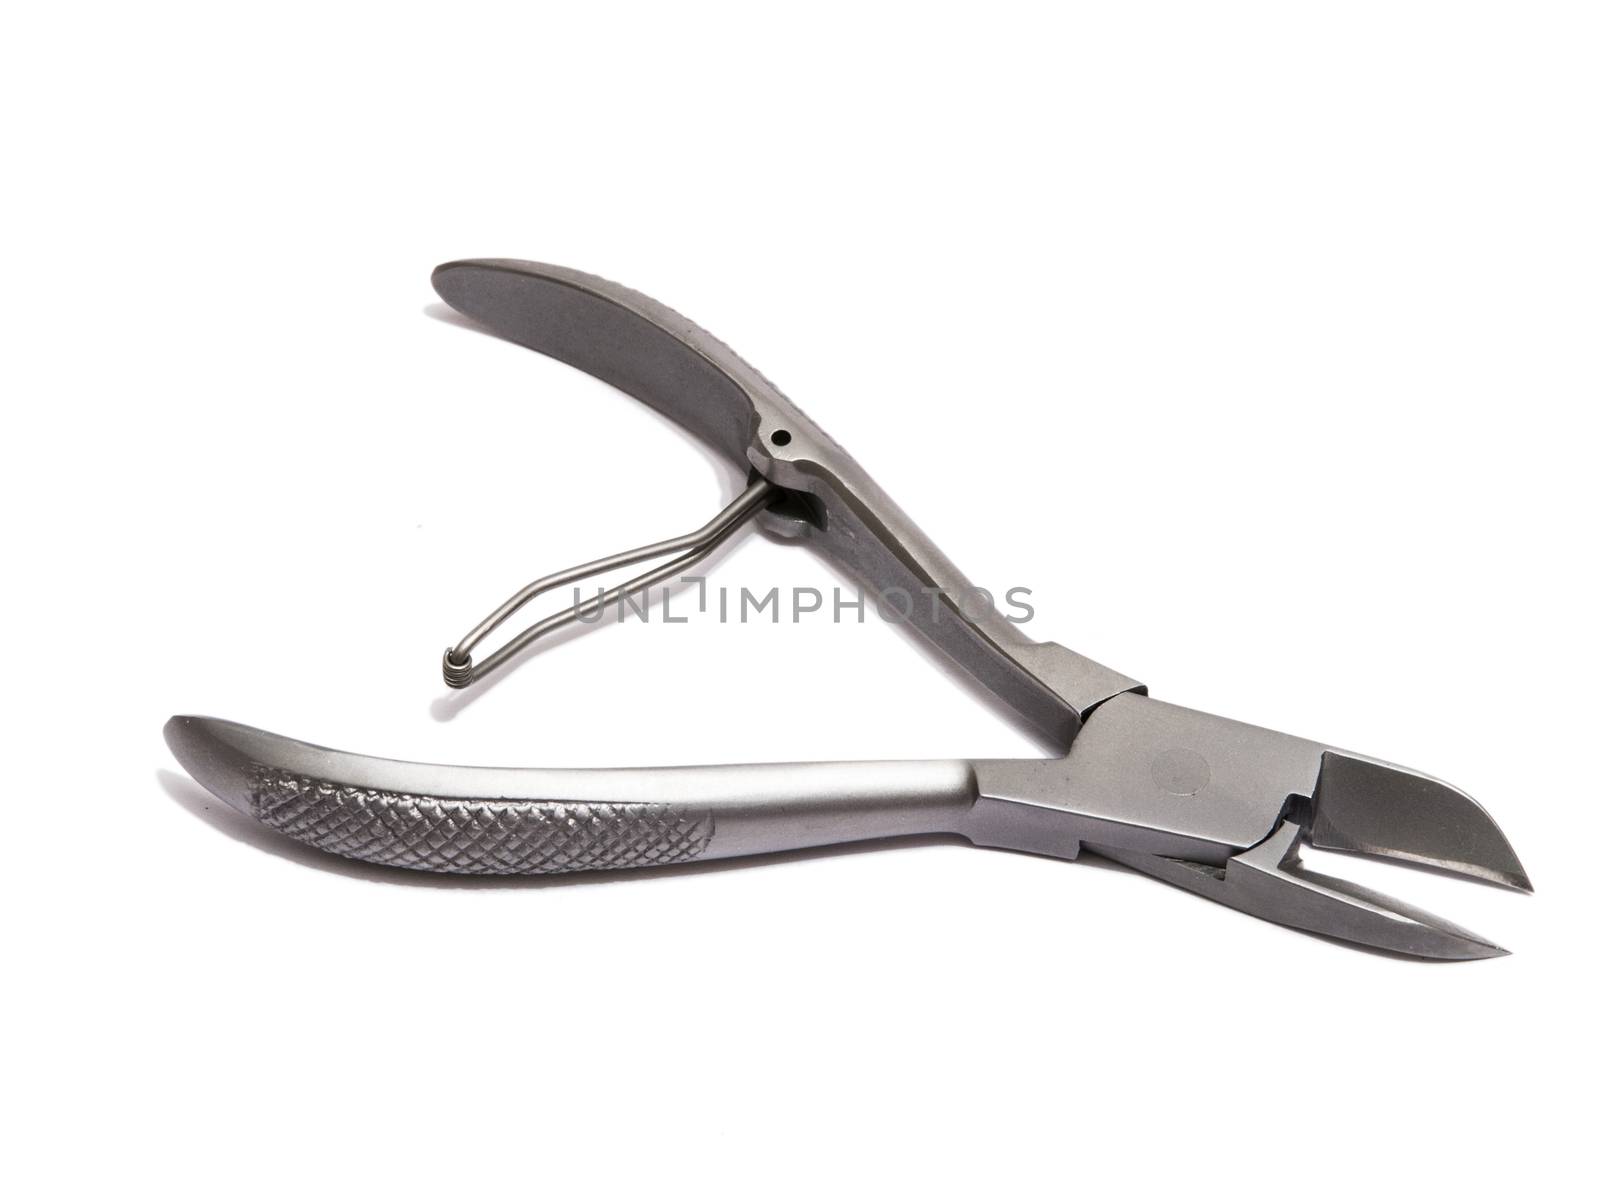 Pedicure tweezers on white background (isolated)